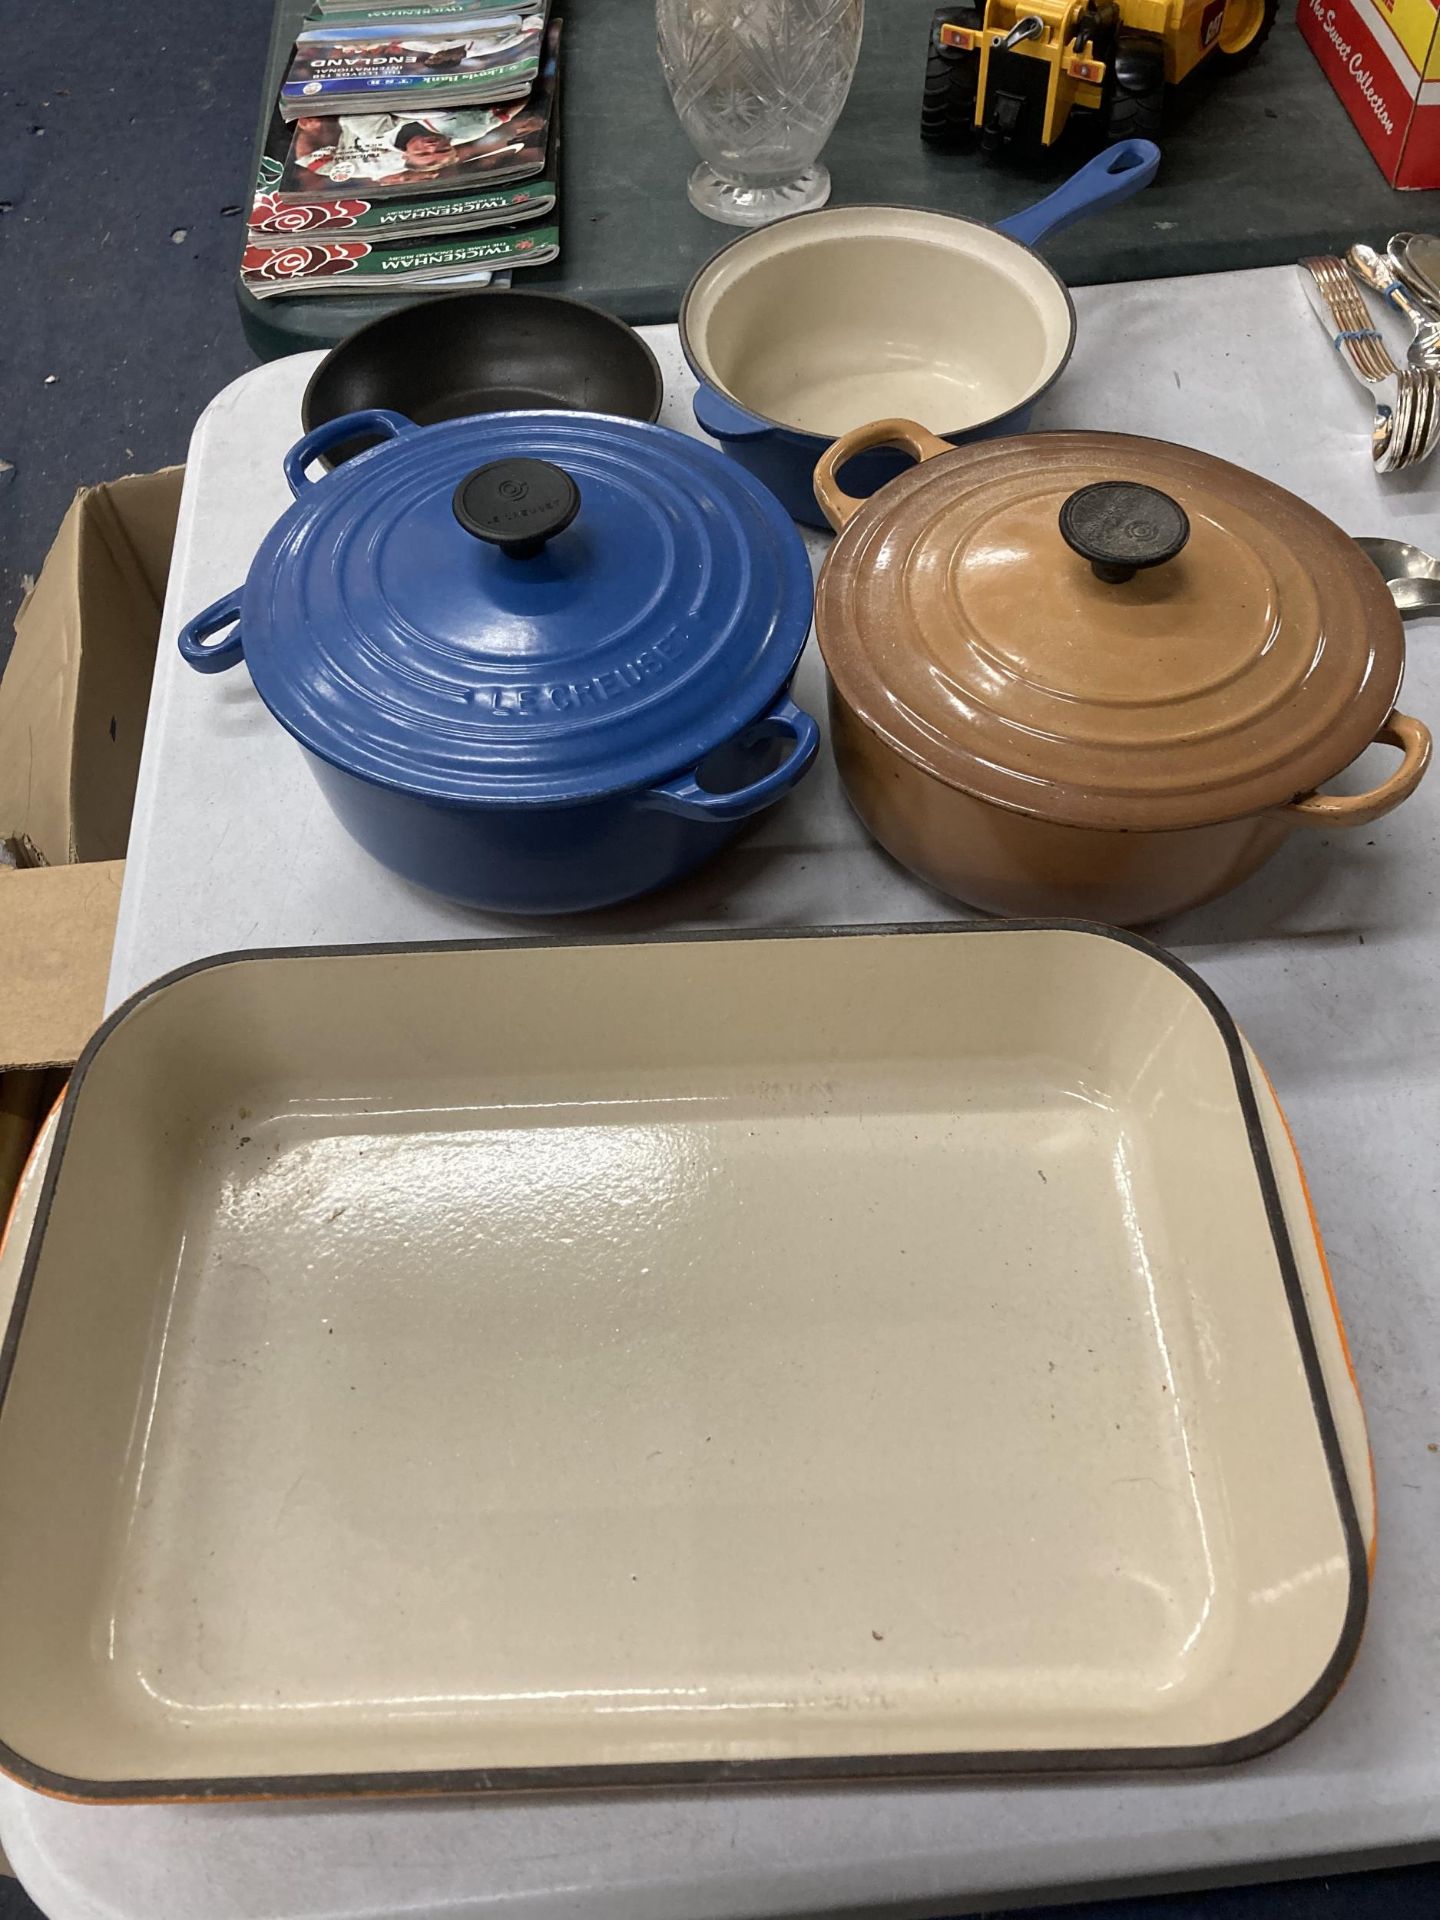 FIVE PIECES OF LE CREUSET COOKWARE TO INCLUDE LIDDED CASSEROLE DISHES, A FLAN DISH AND PANS